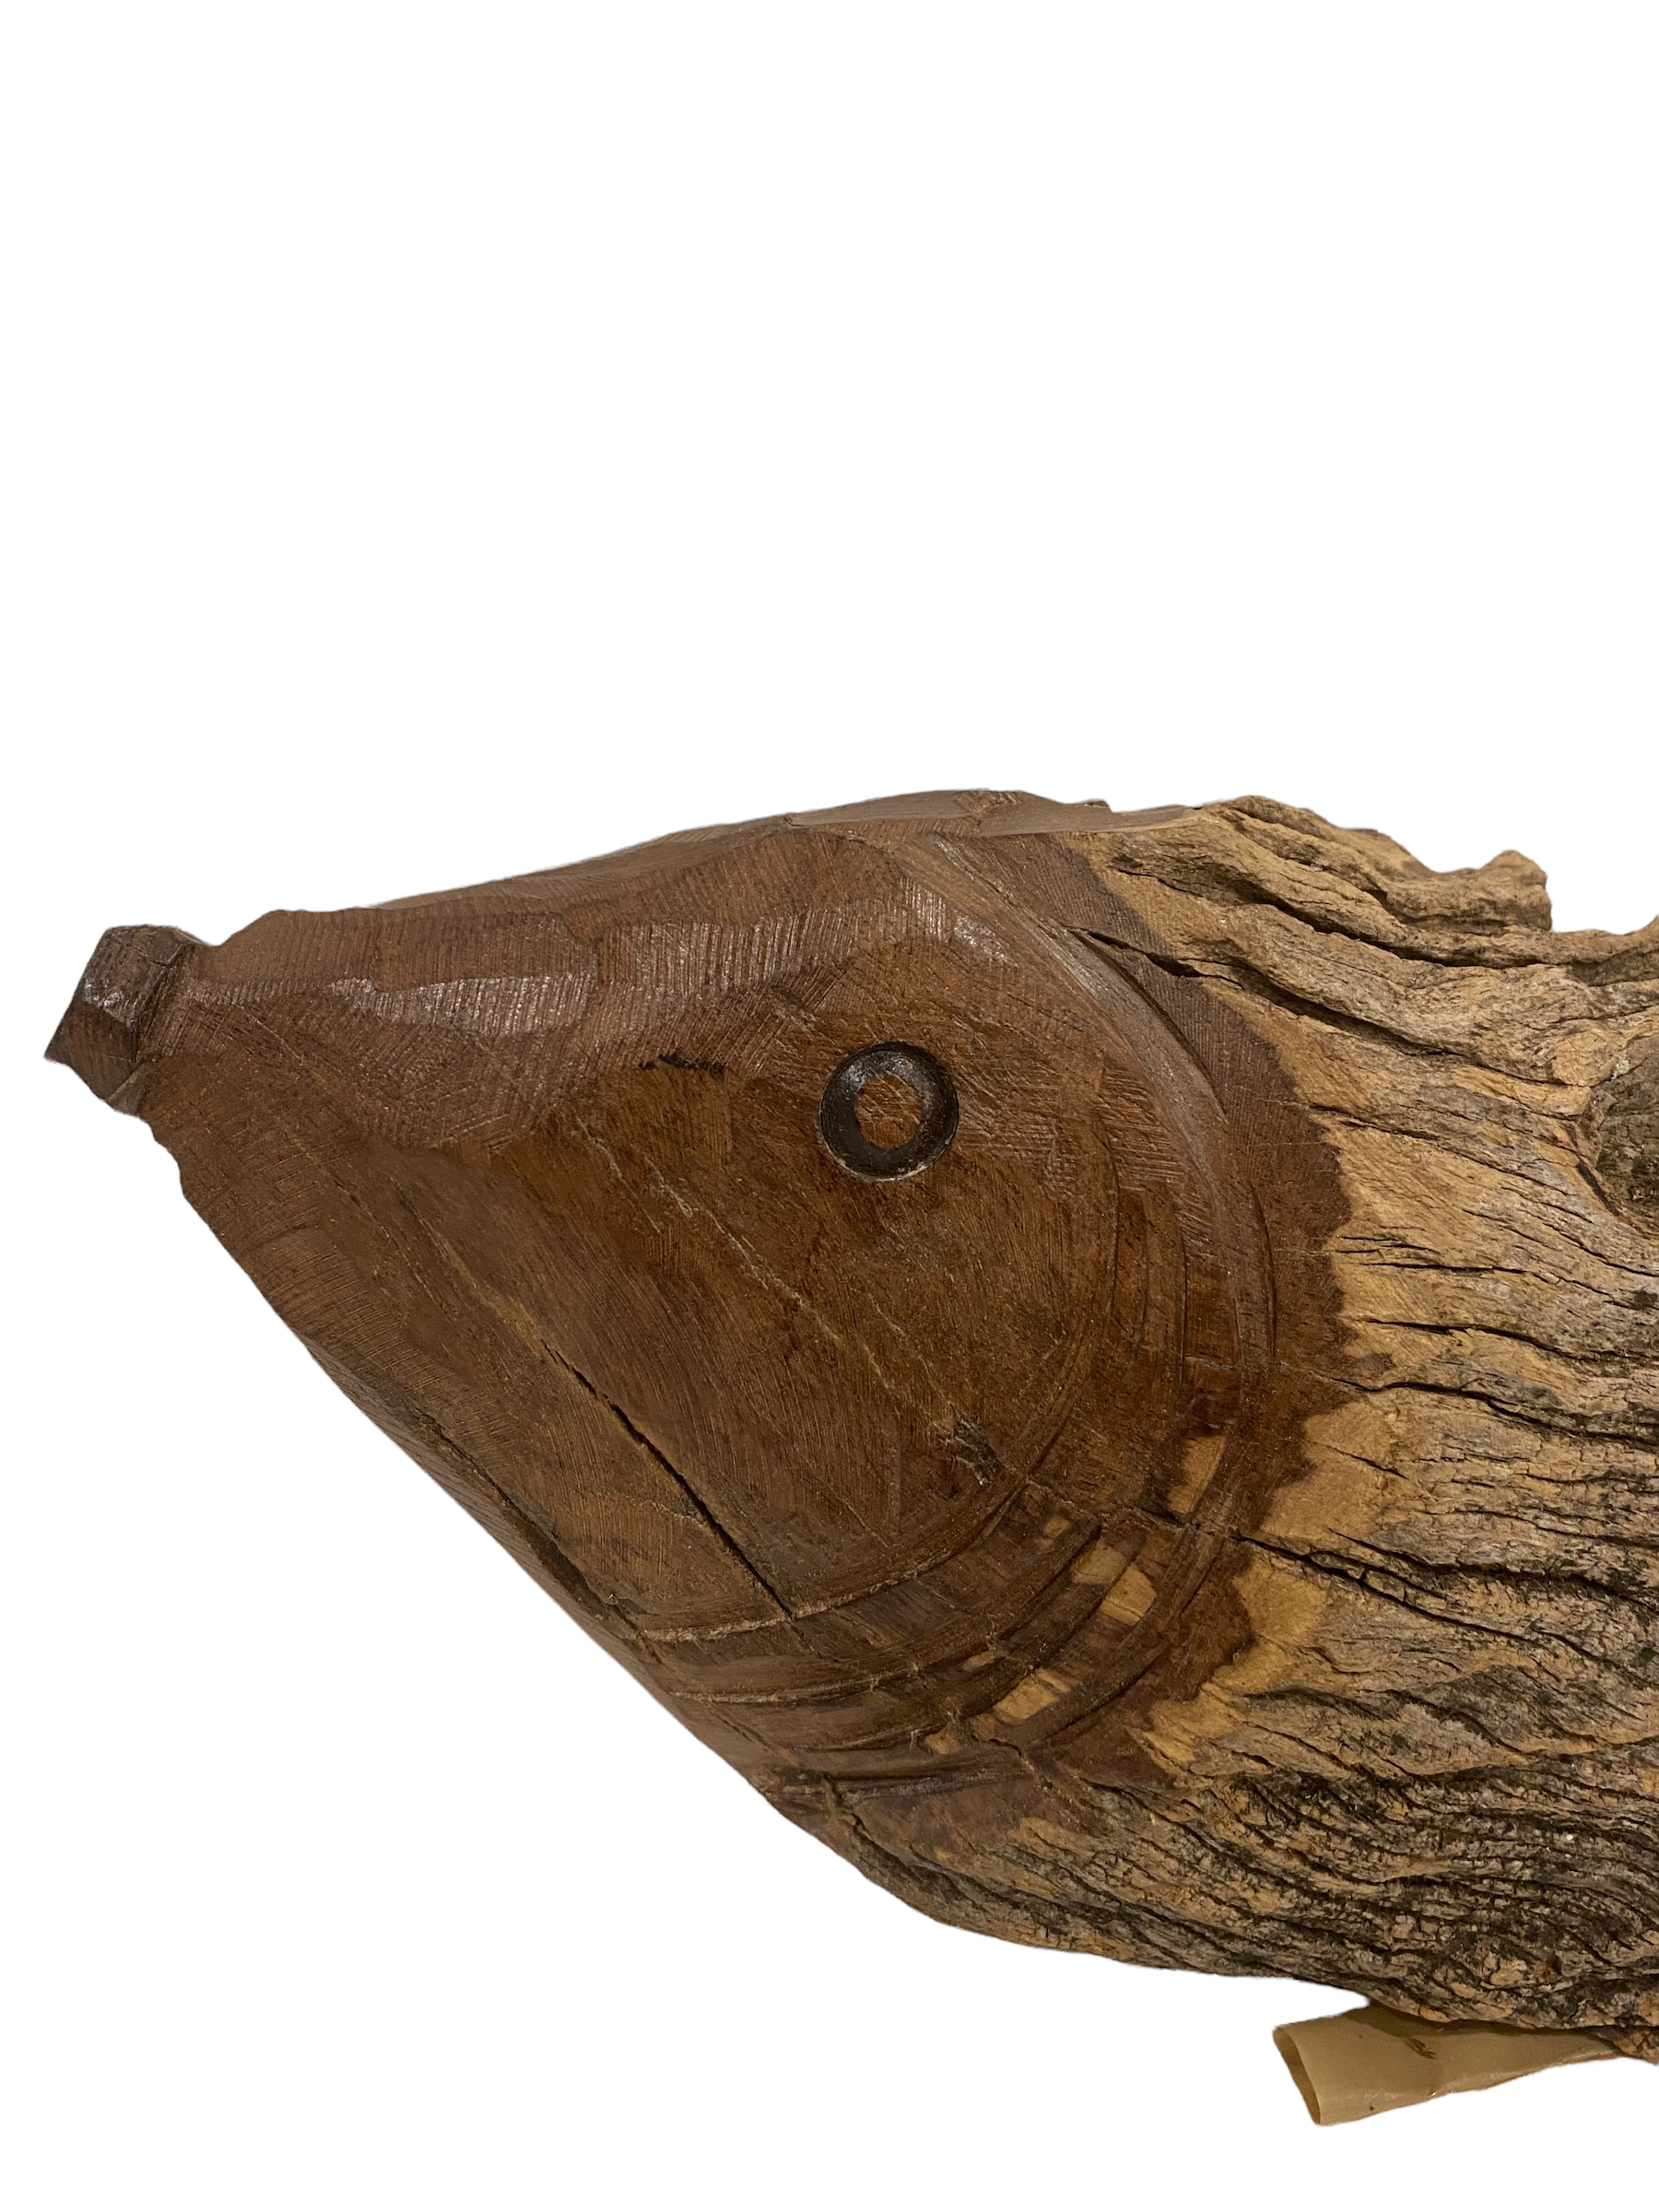 Driftwood Hand Carved Fish - (1307)